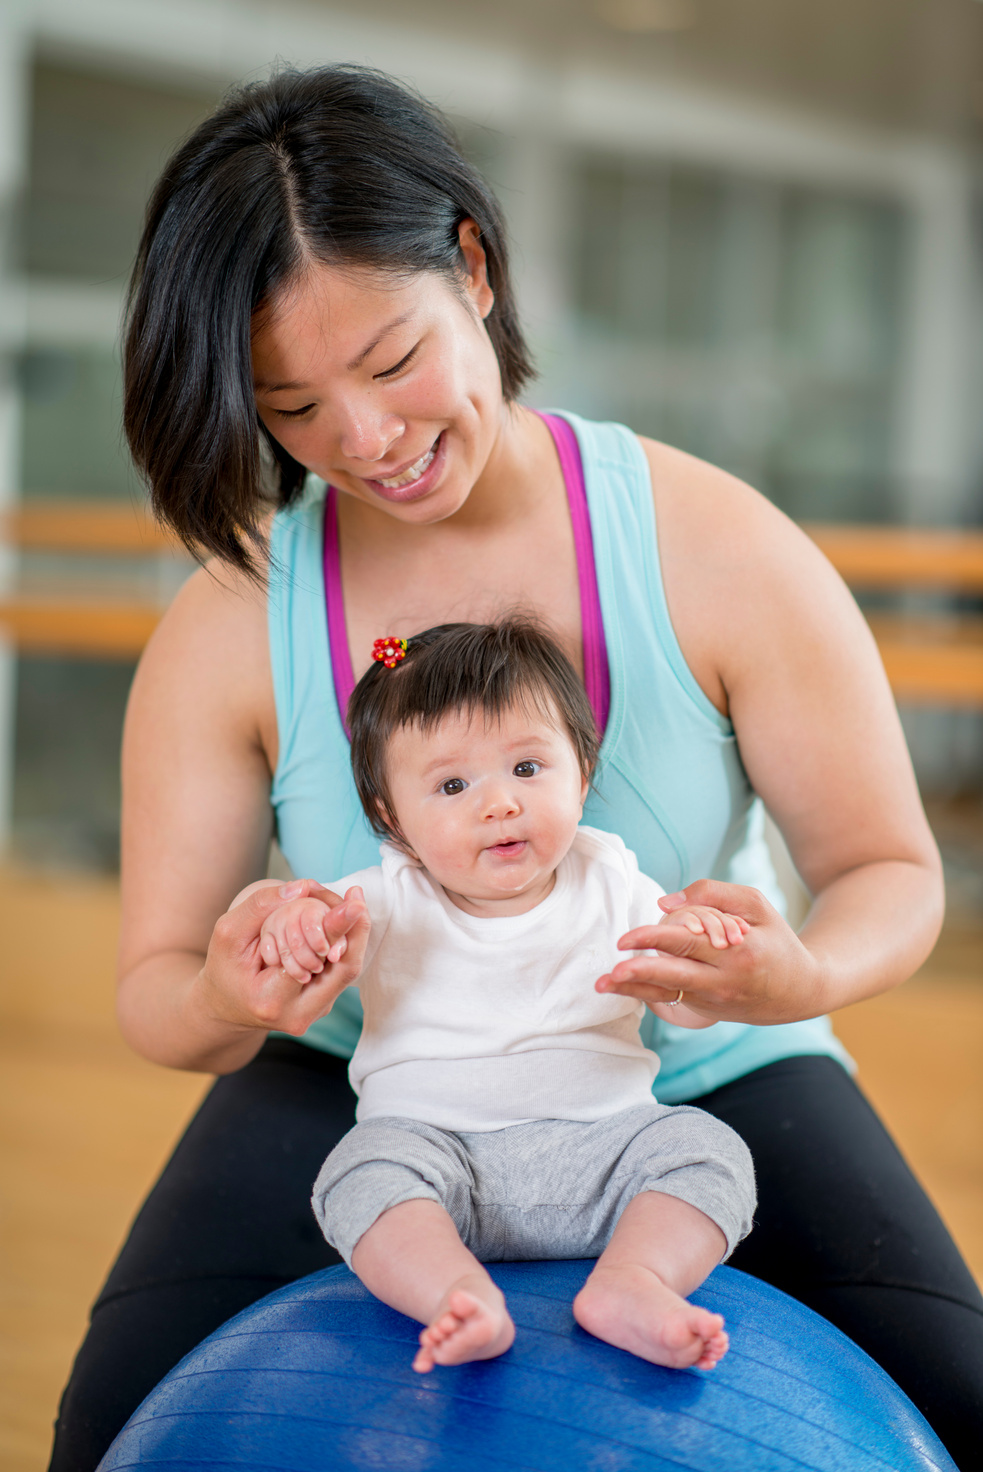 Mother and Baby at the Gym